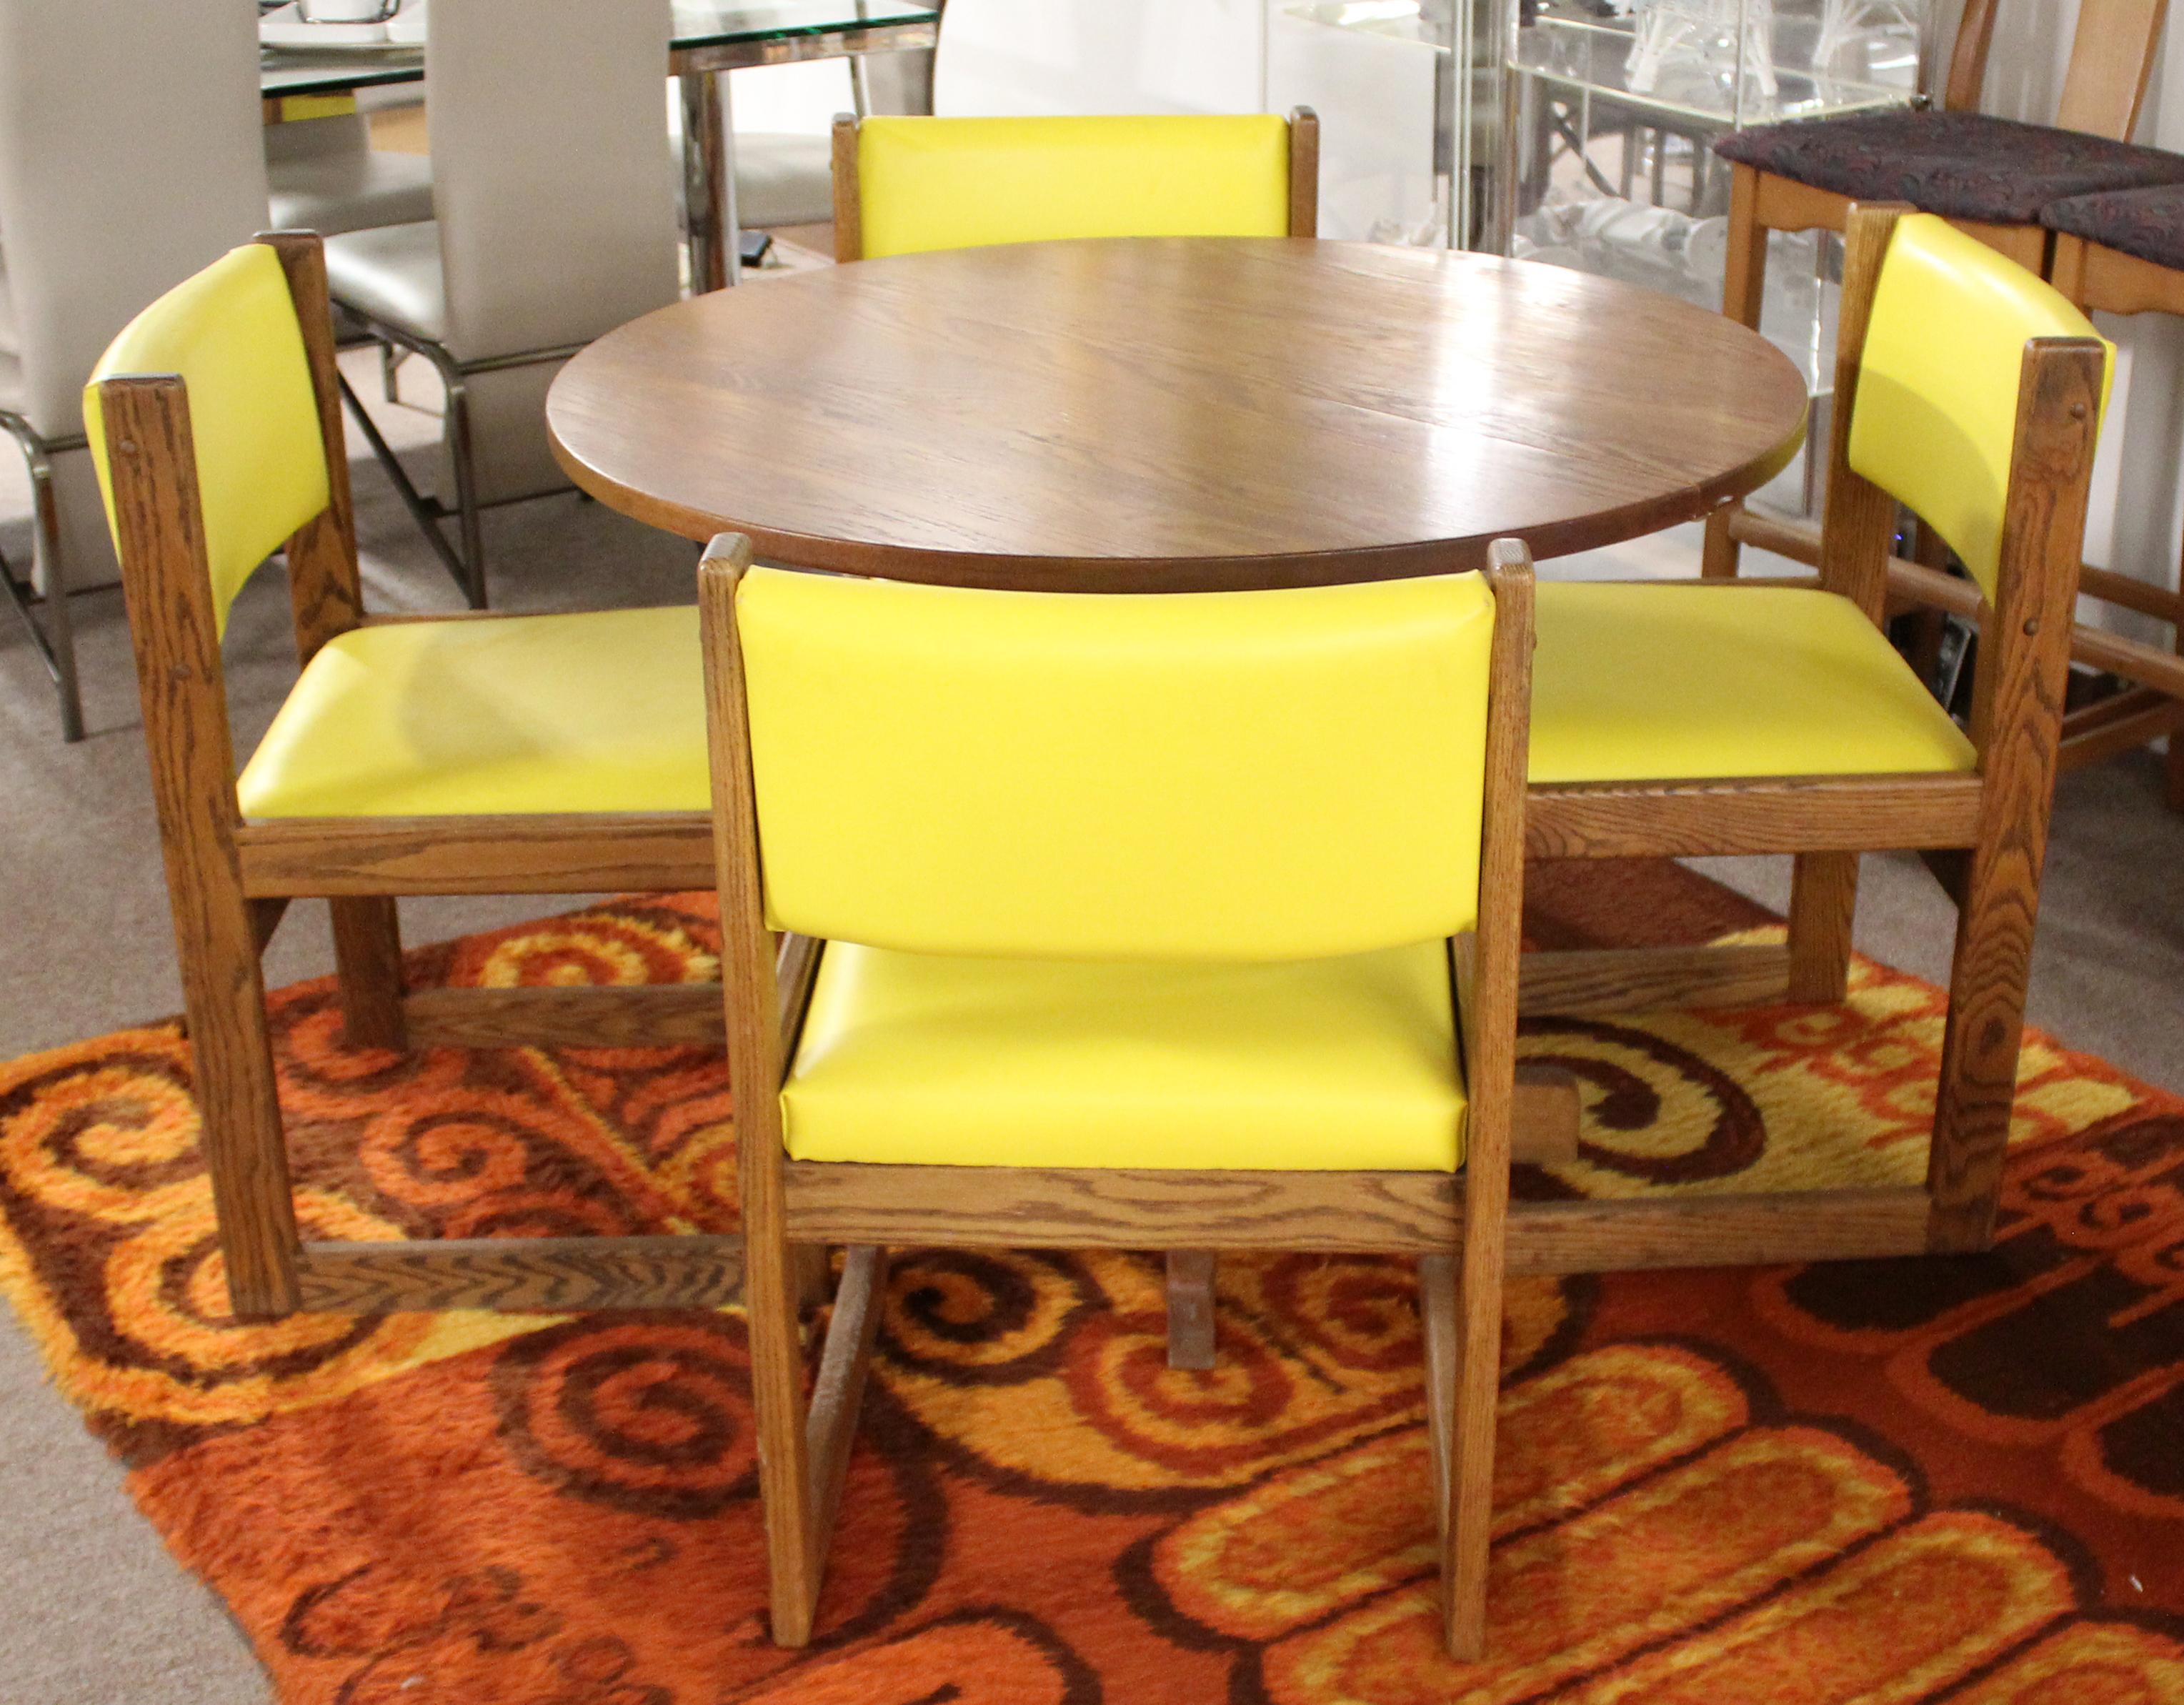 For your consideration is an eye-catching game or dining set, including expandable table and four yellow vinyl covered side dining chairs, by Lakeland Furniture, circa 1960s. In very good vintage condition. The dimensions of the table are 40